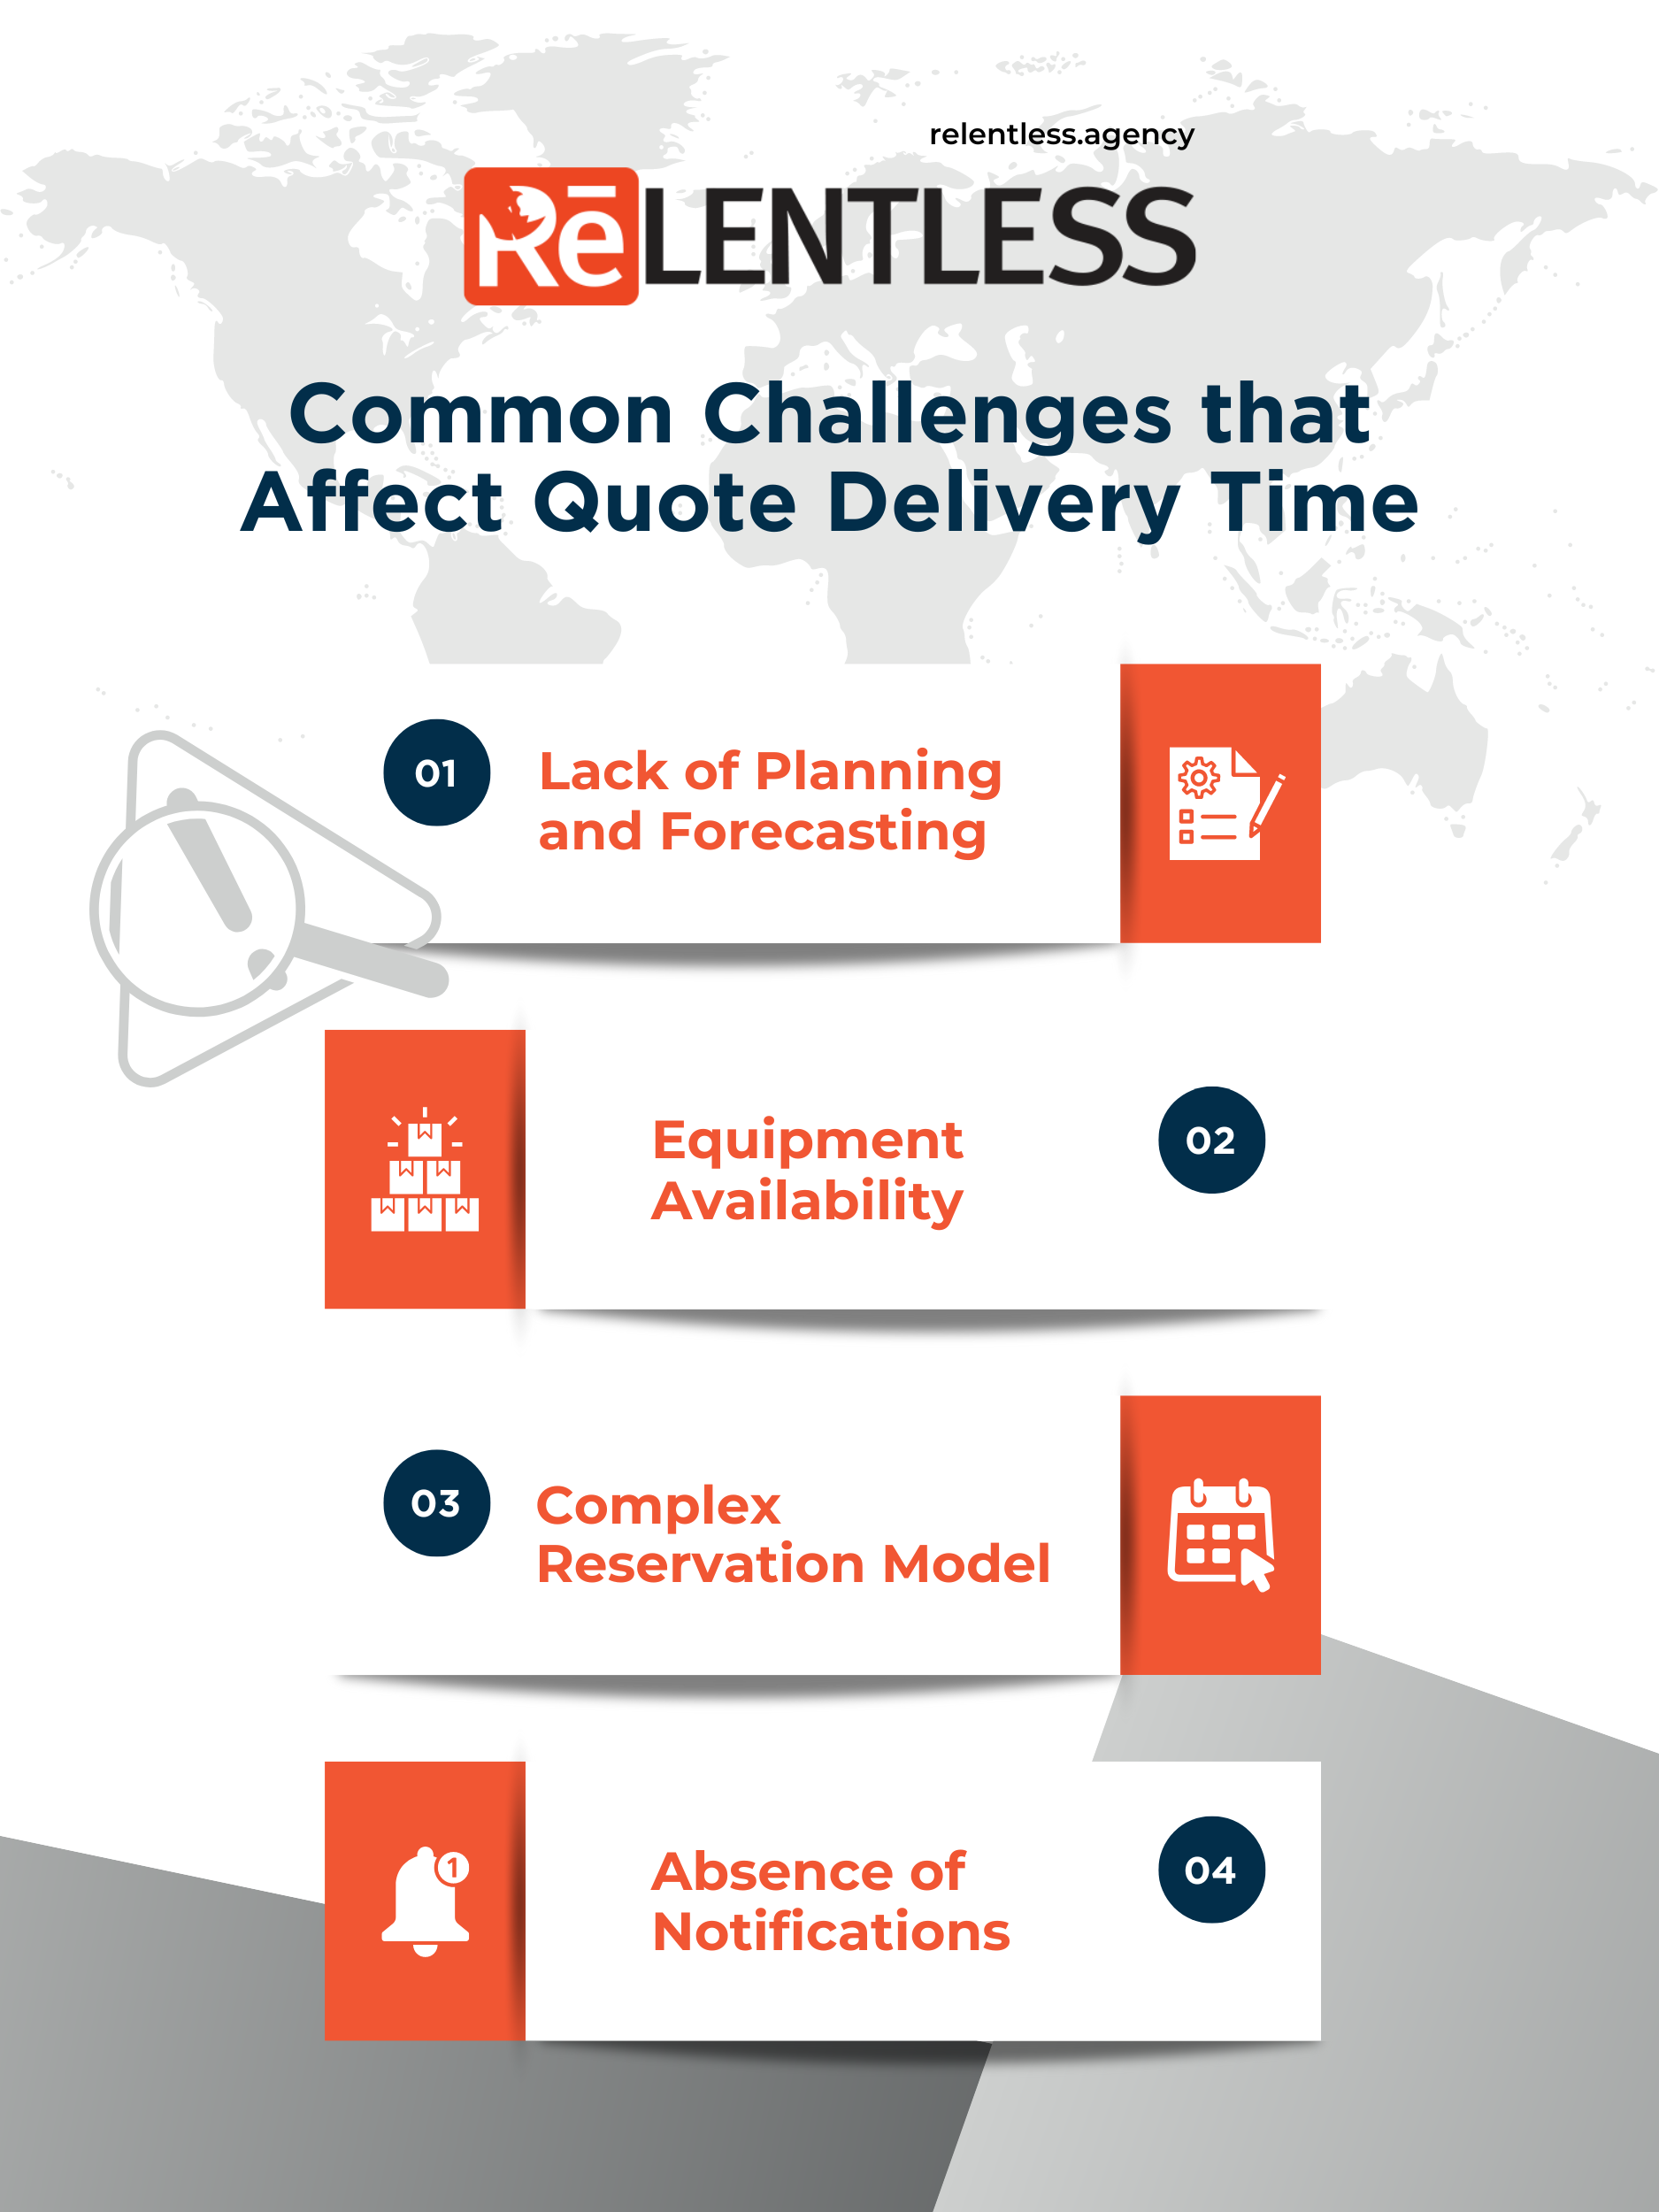 How to Reduce Quote Delivery Time for Your Equipment Rental Business - Common Challenges